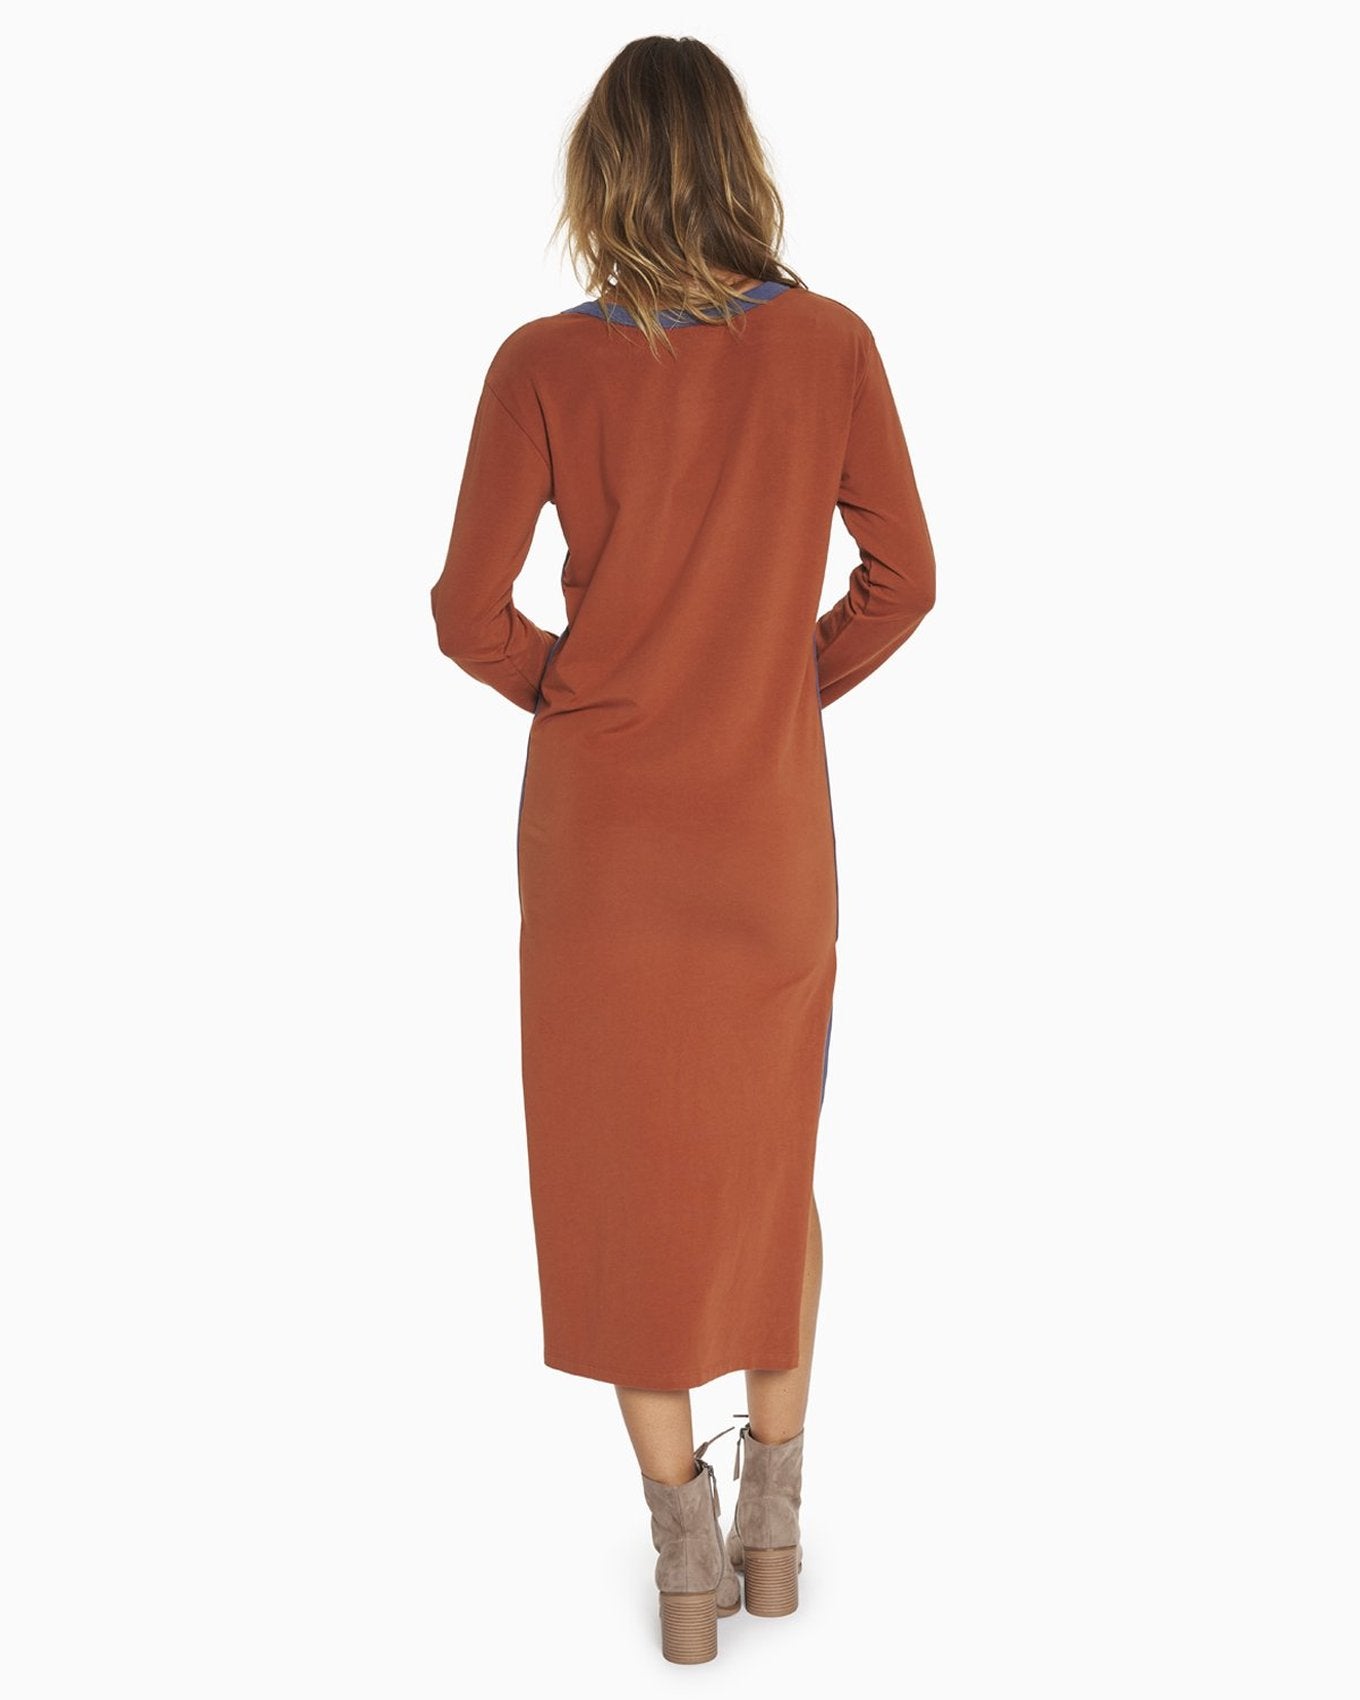 YesAnd Organic Midi Track Style Dress Dress in color Mocha Bisque and shape sheath